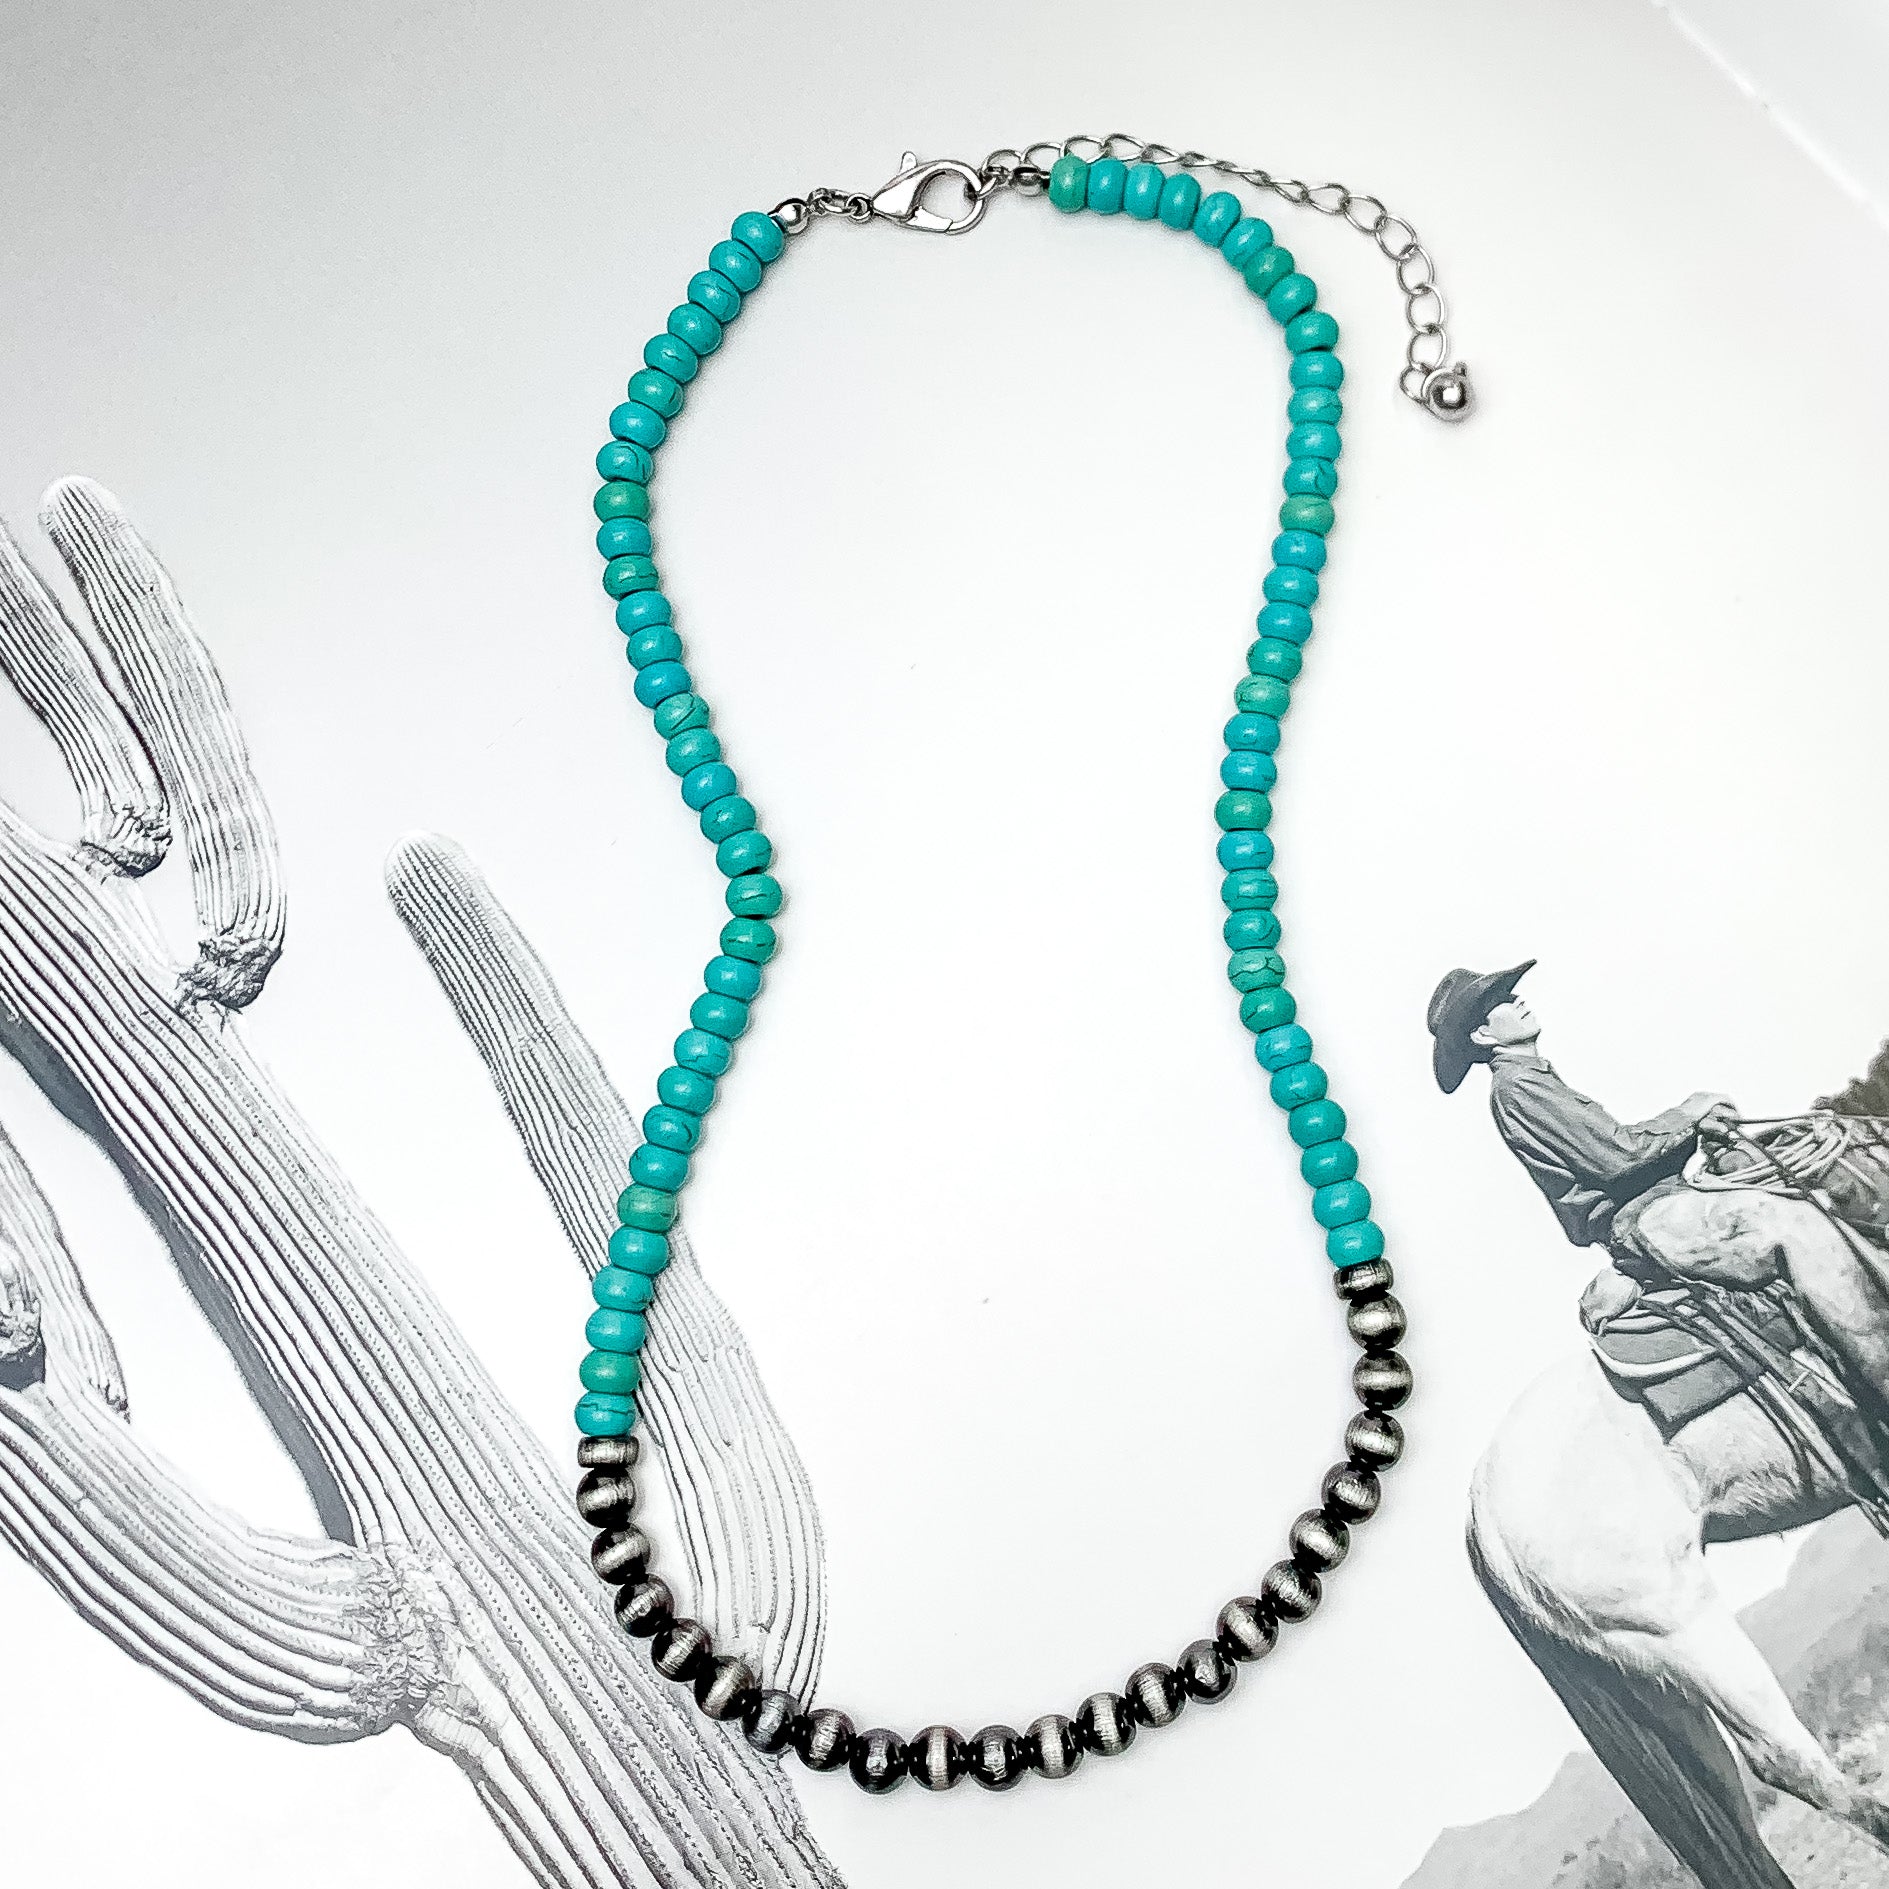 Turquoise Blue and Silver Tone Beaded Necklace. Pictured on a western themed background.